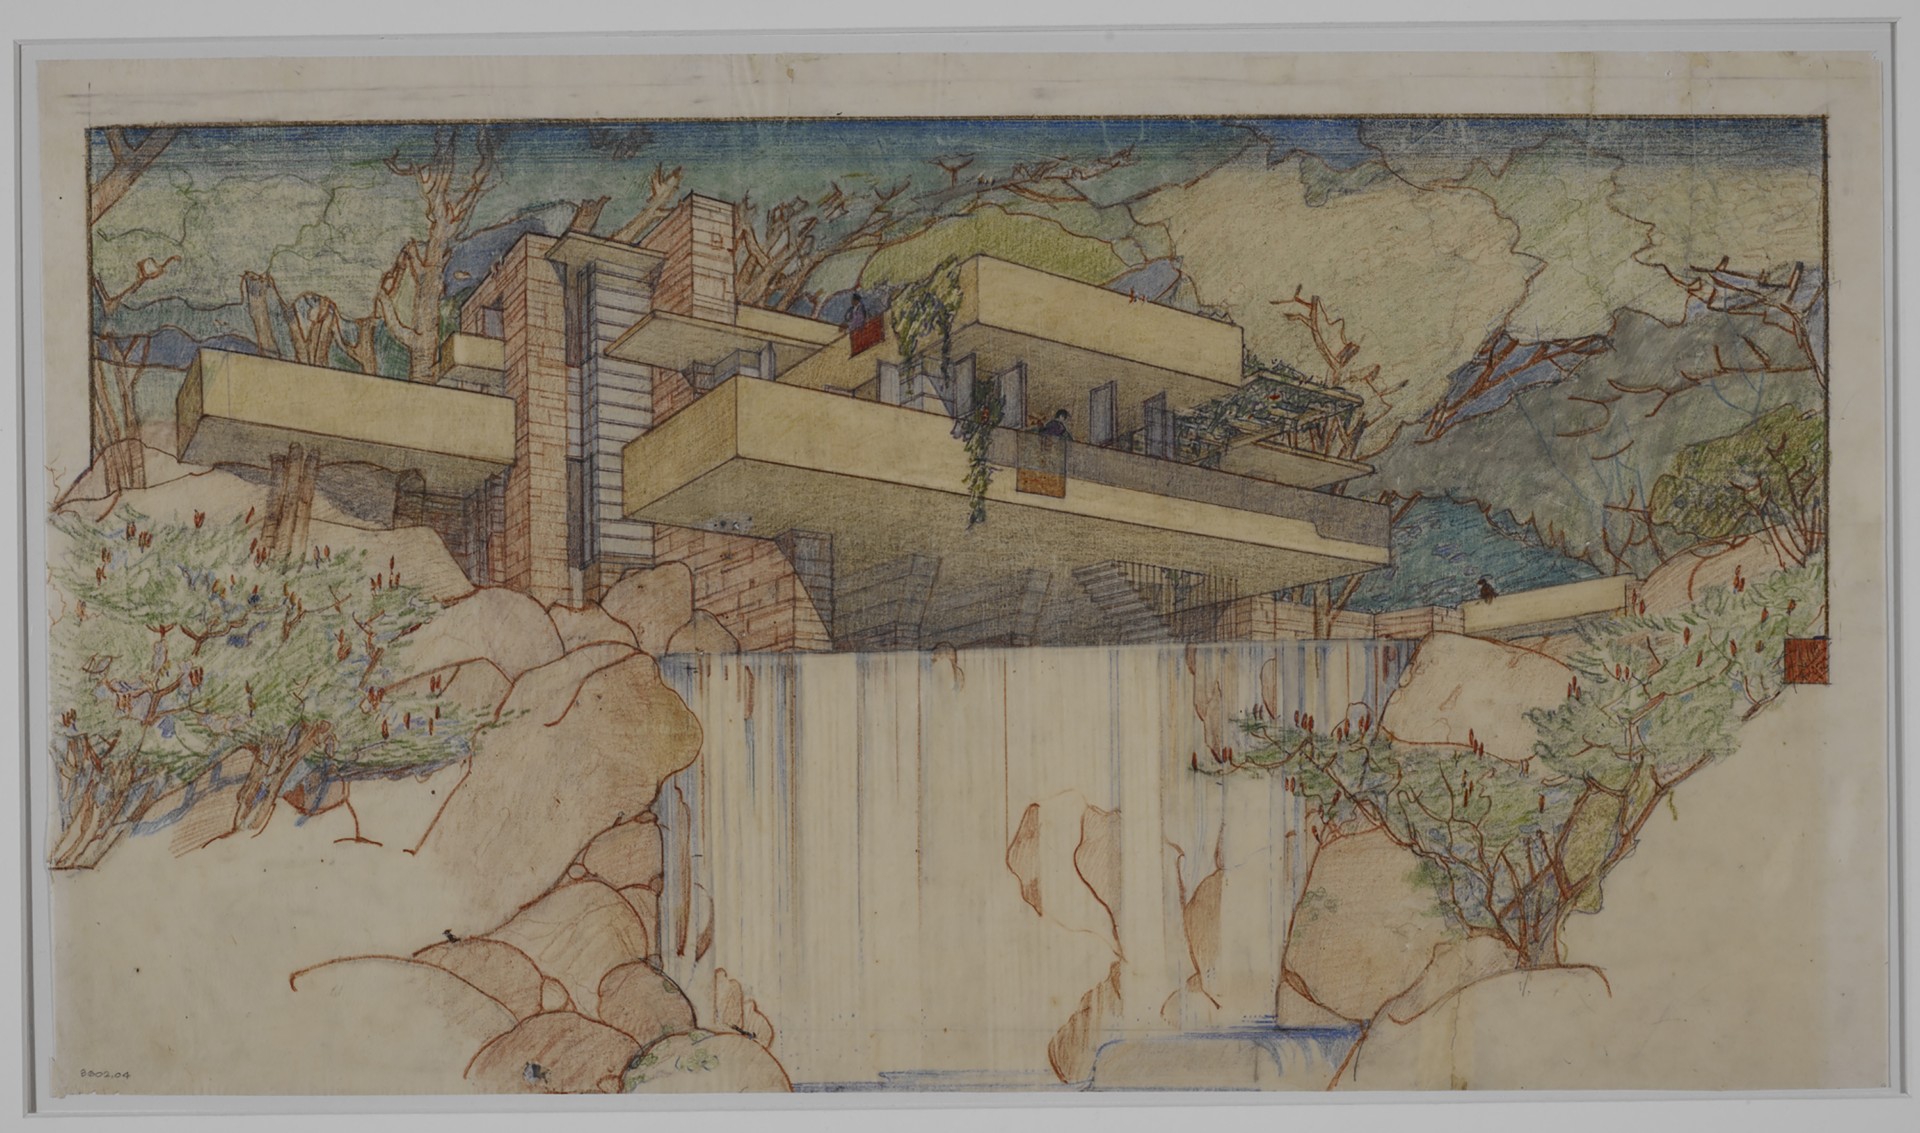 Events for the 150th anniversary of Frank Lloyd Wright | Floornature